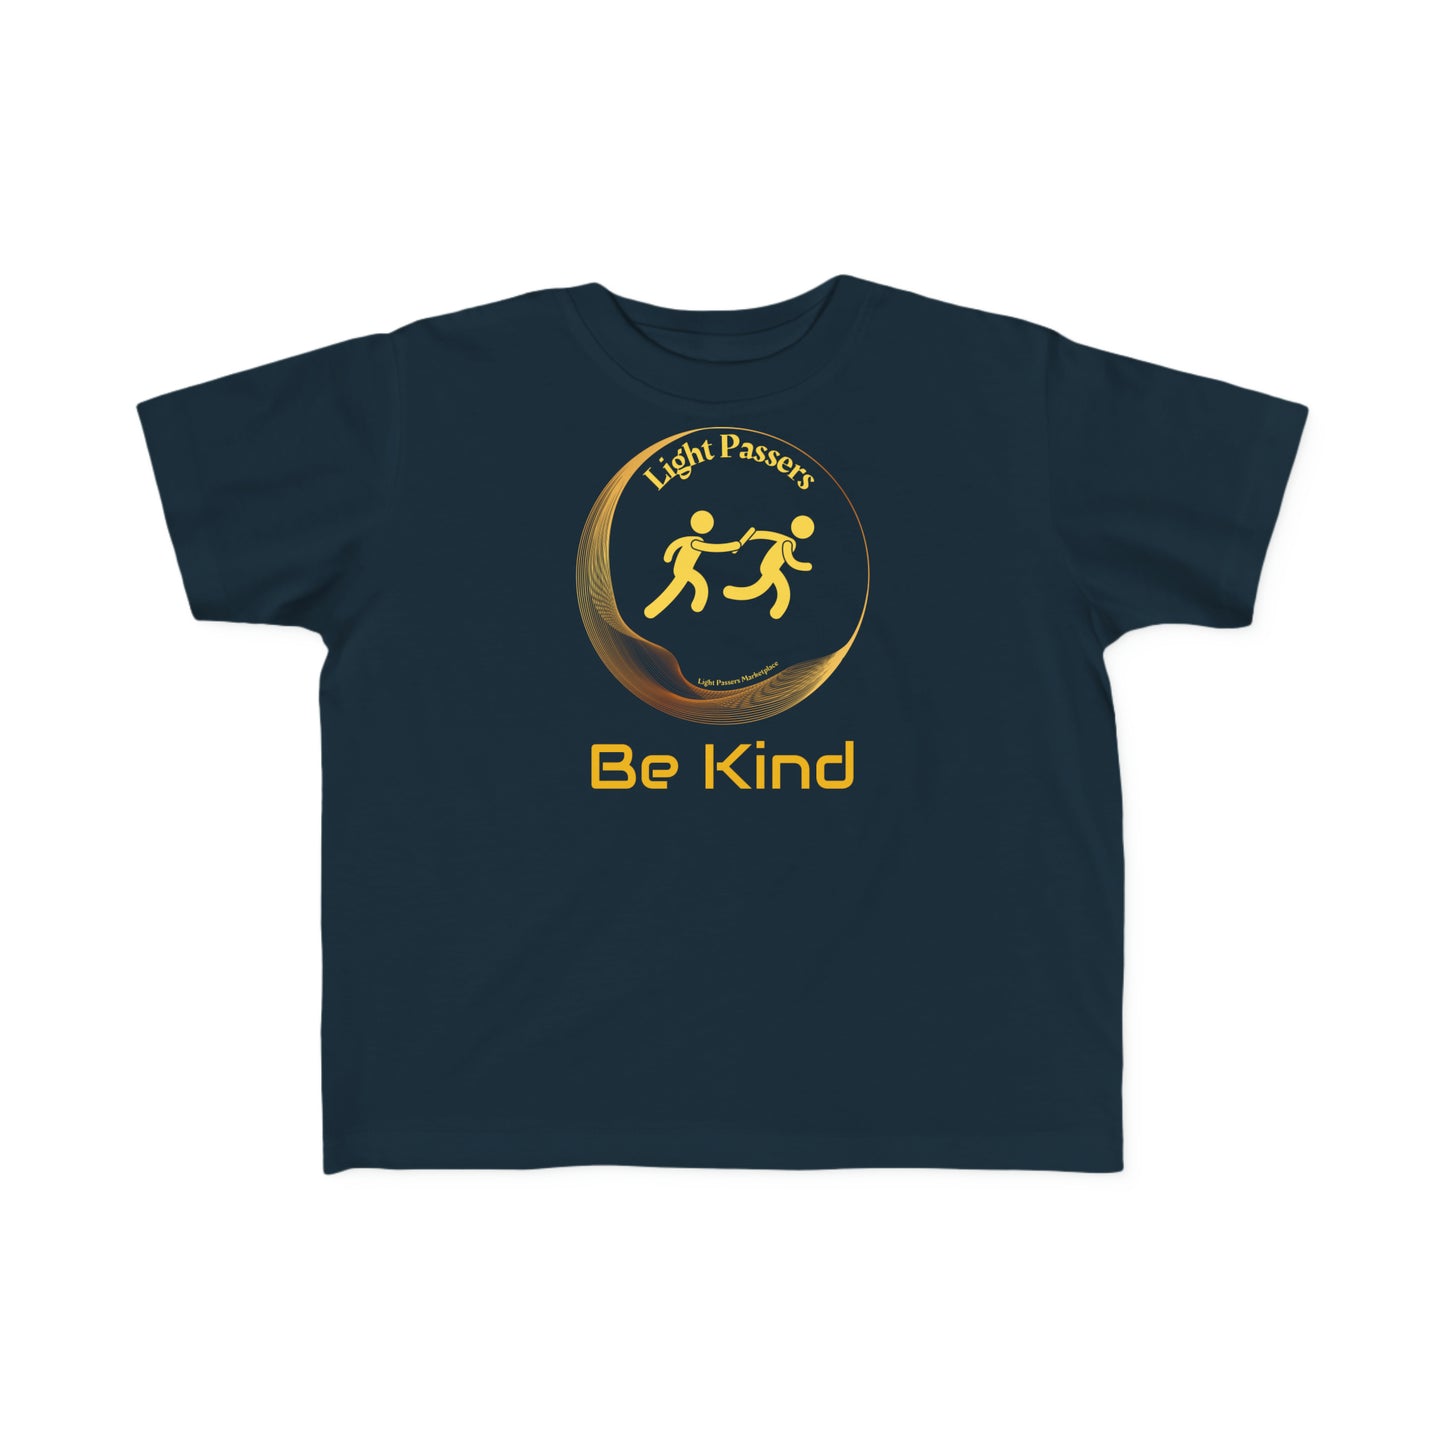 Light Passers Marketplace Relay Light Passers Be Kind  Toddler T-shirt cotton Simple Messages, Fitness, Mental Health